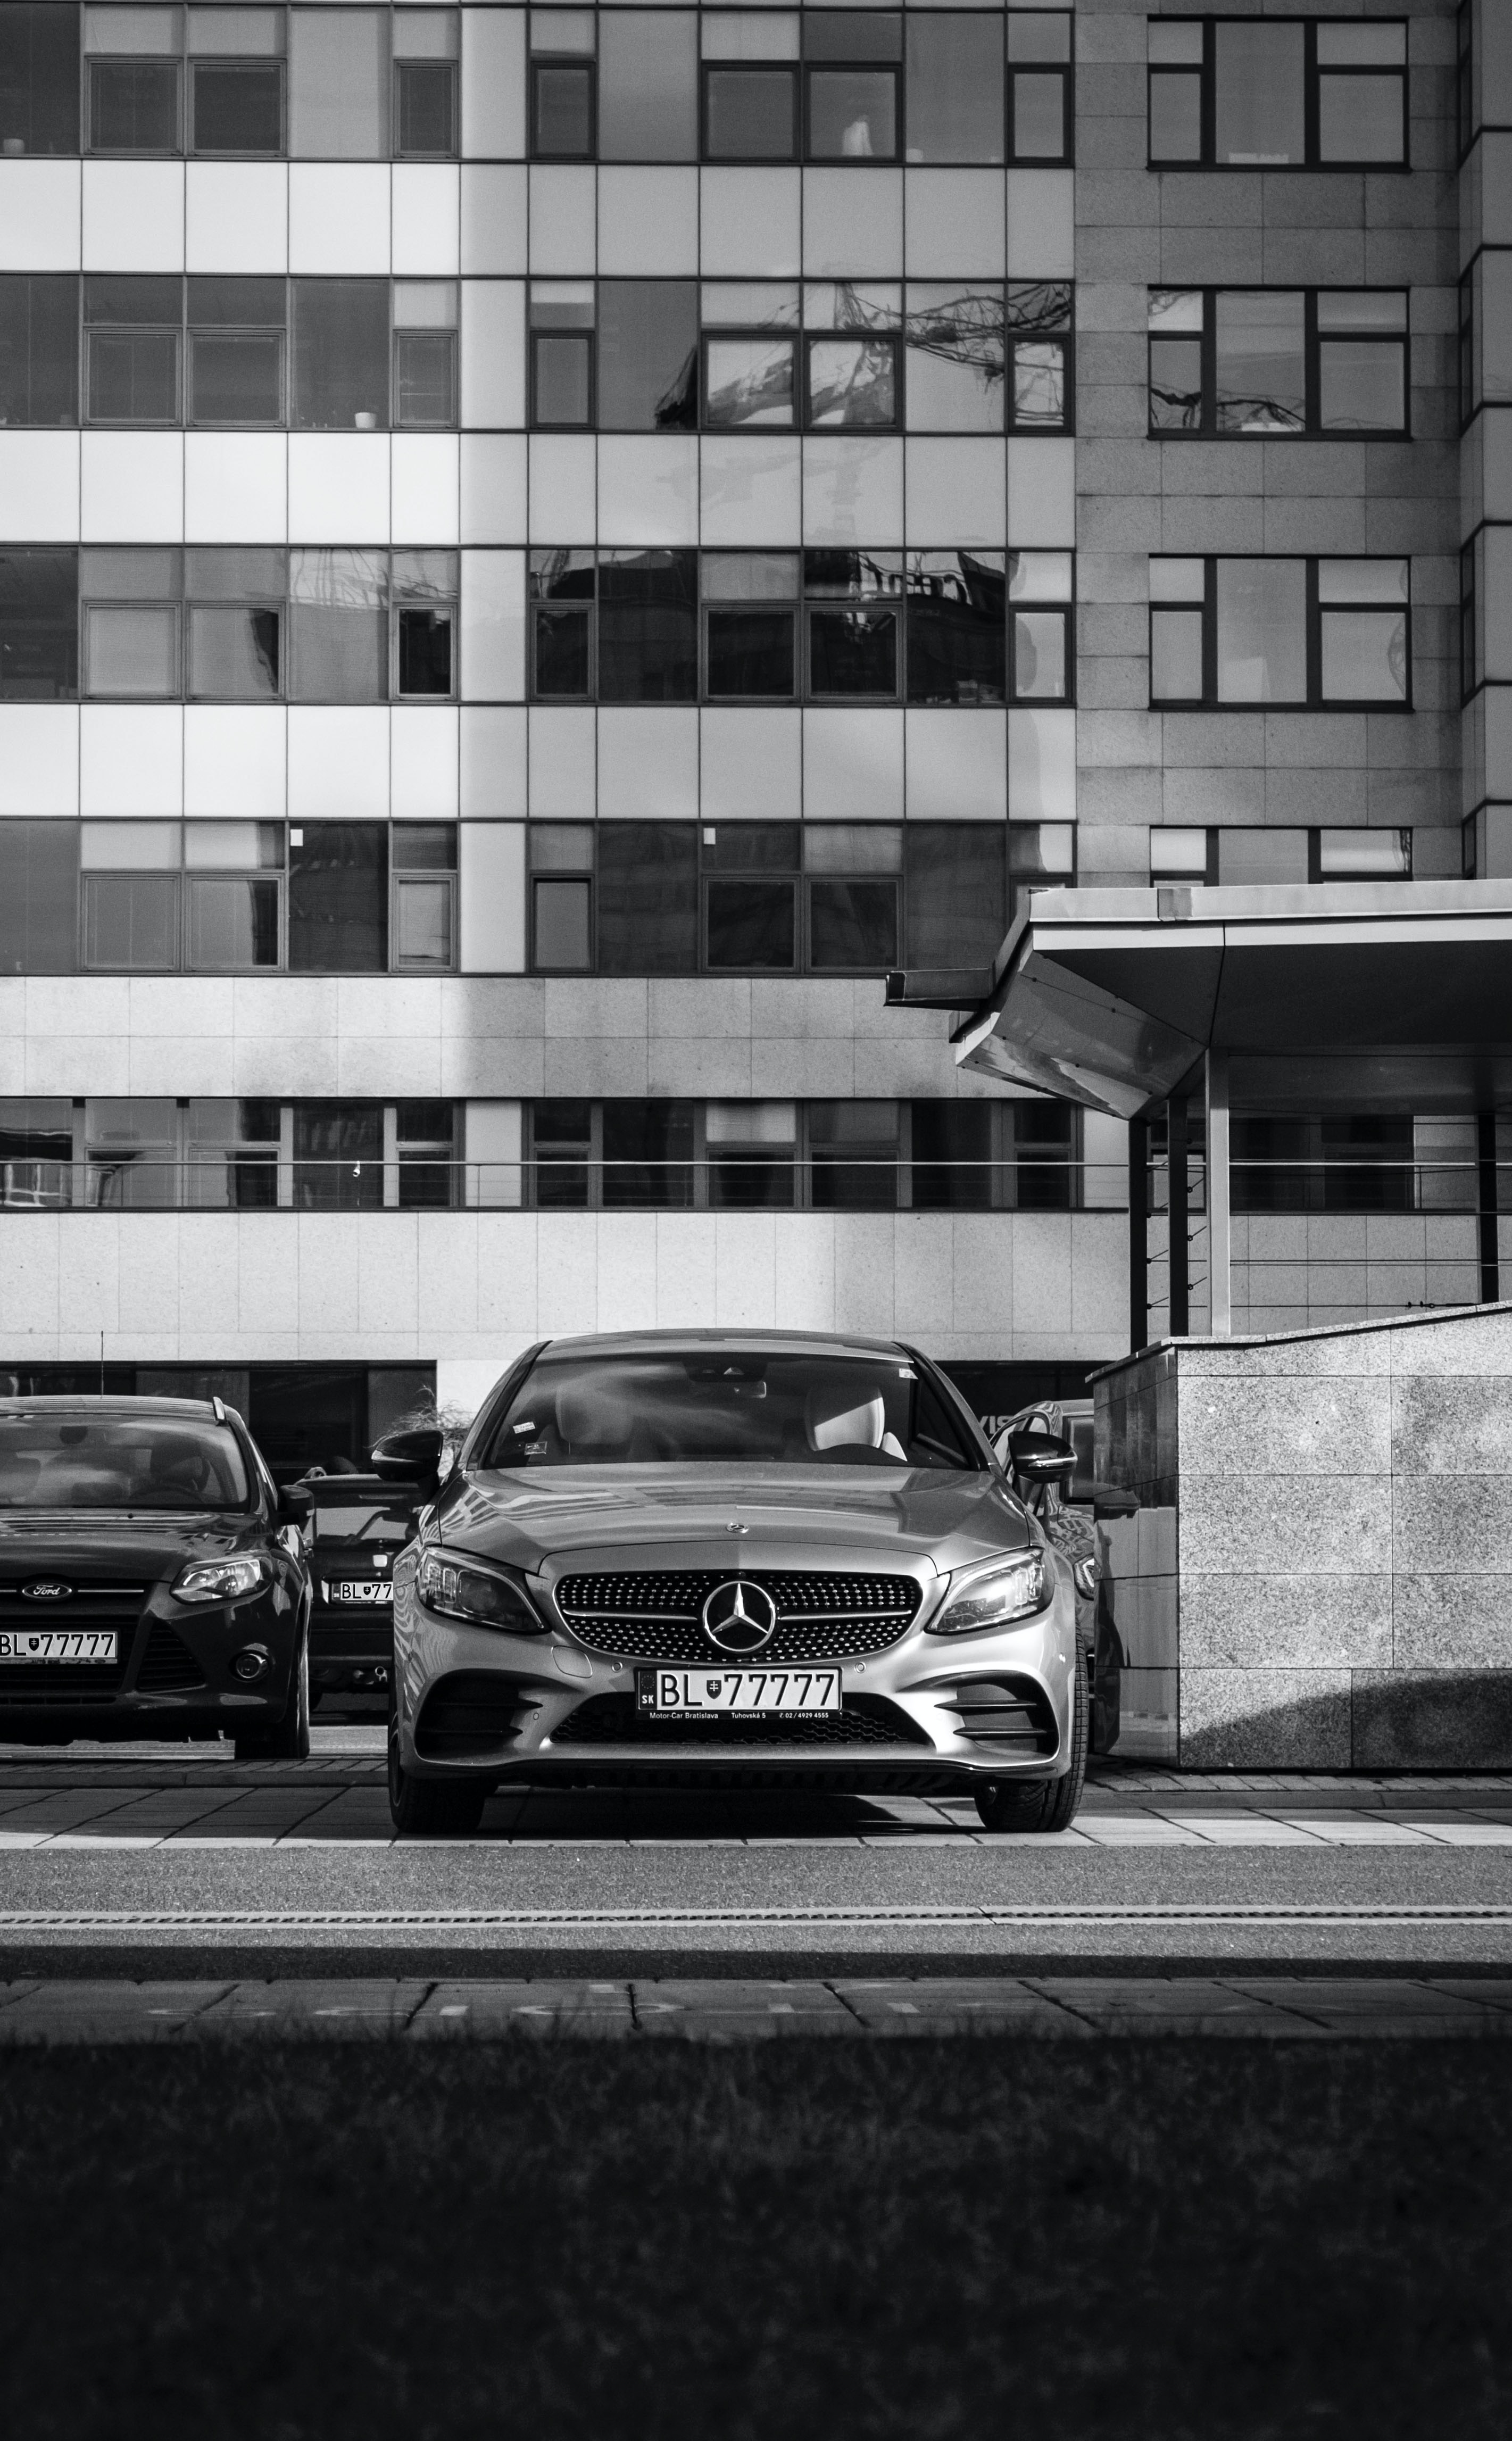 mercedes benz, cars, car, front view, bw, chb High Definition image